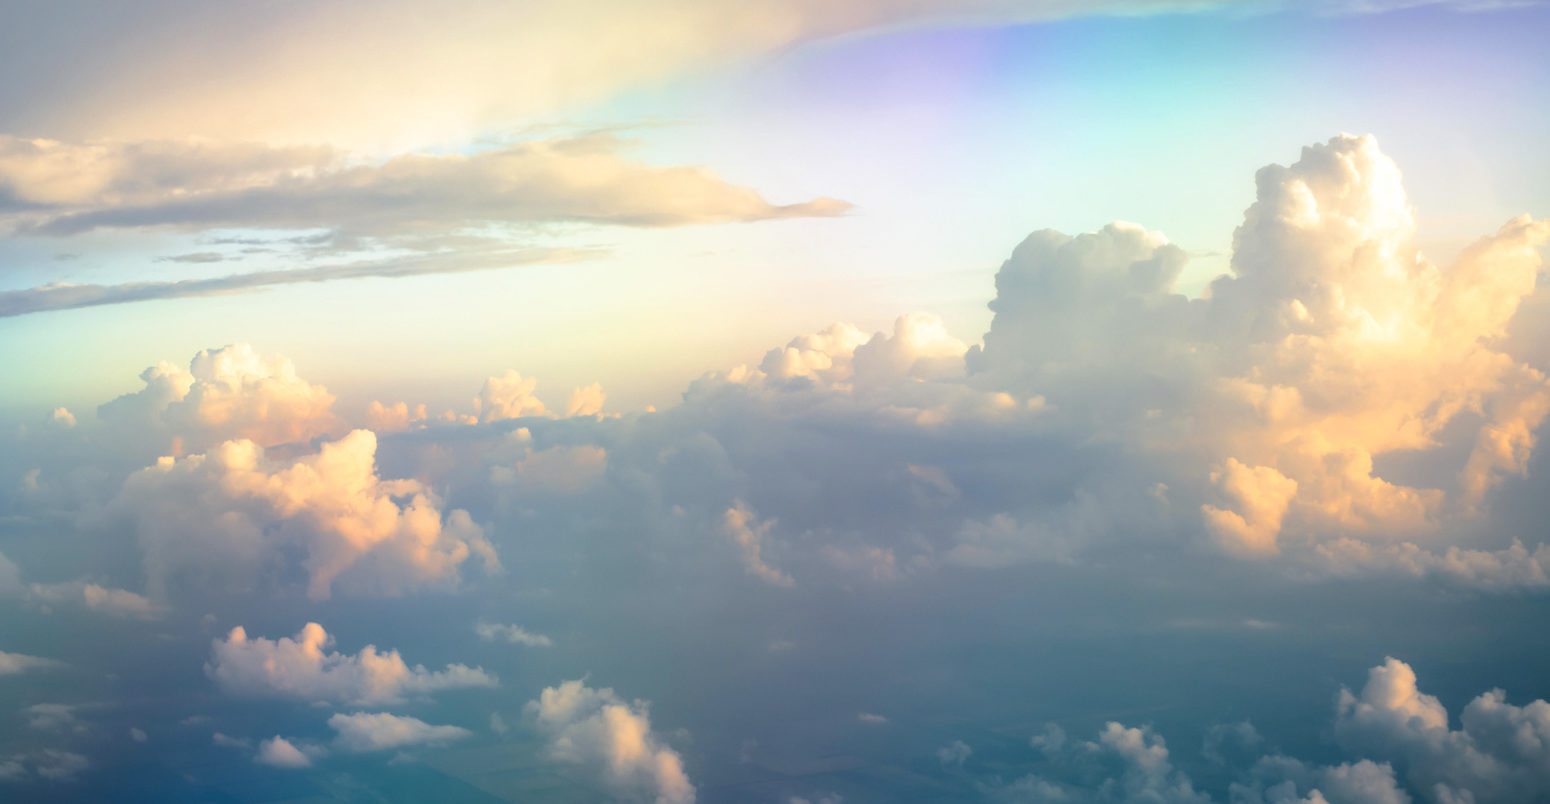 Atmosphere-with-clouds-and-rainbow